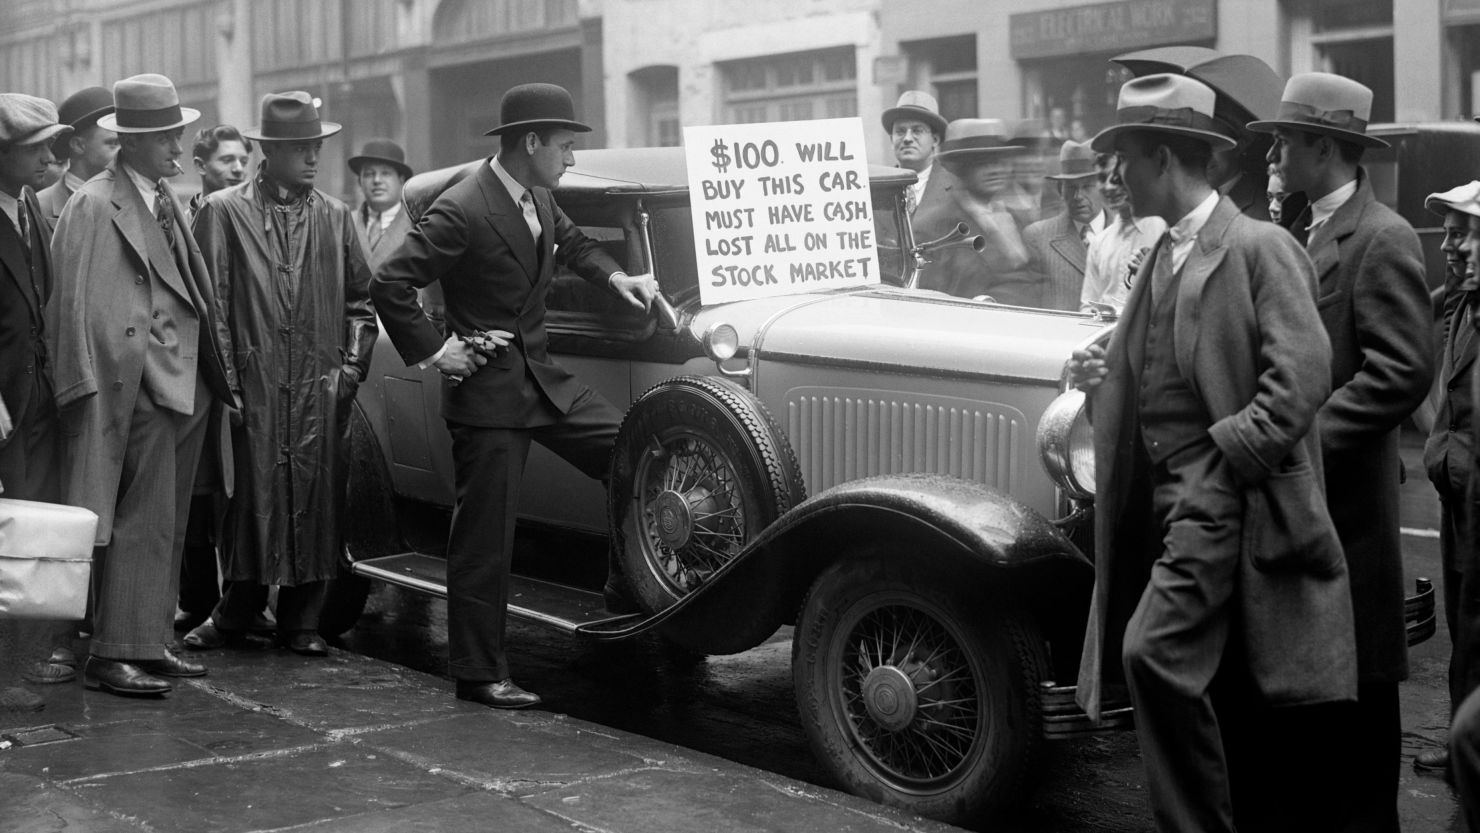 A Wall Street speculator tries to sell his car after losing all his money in the stock market crash.